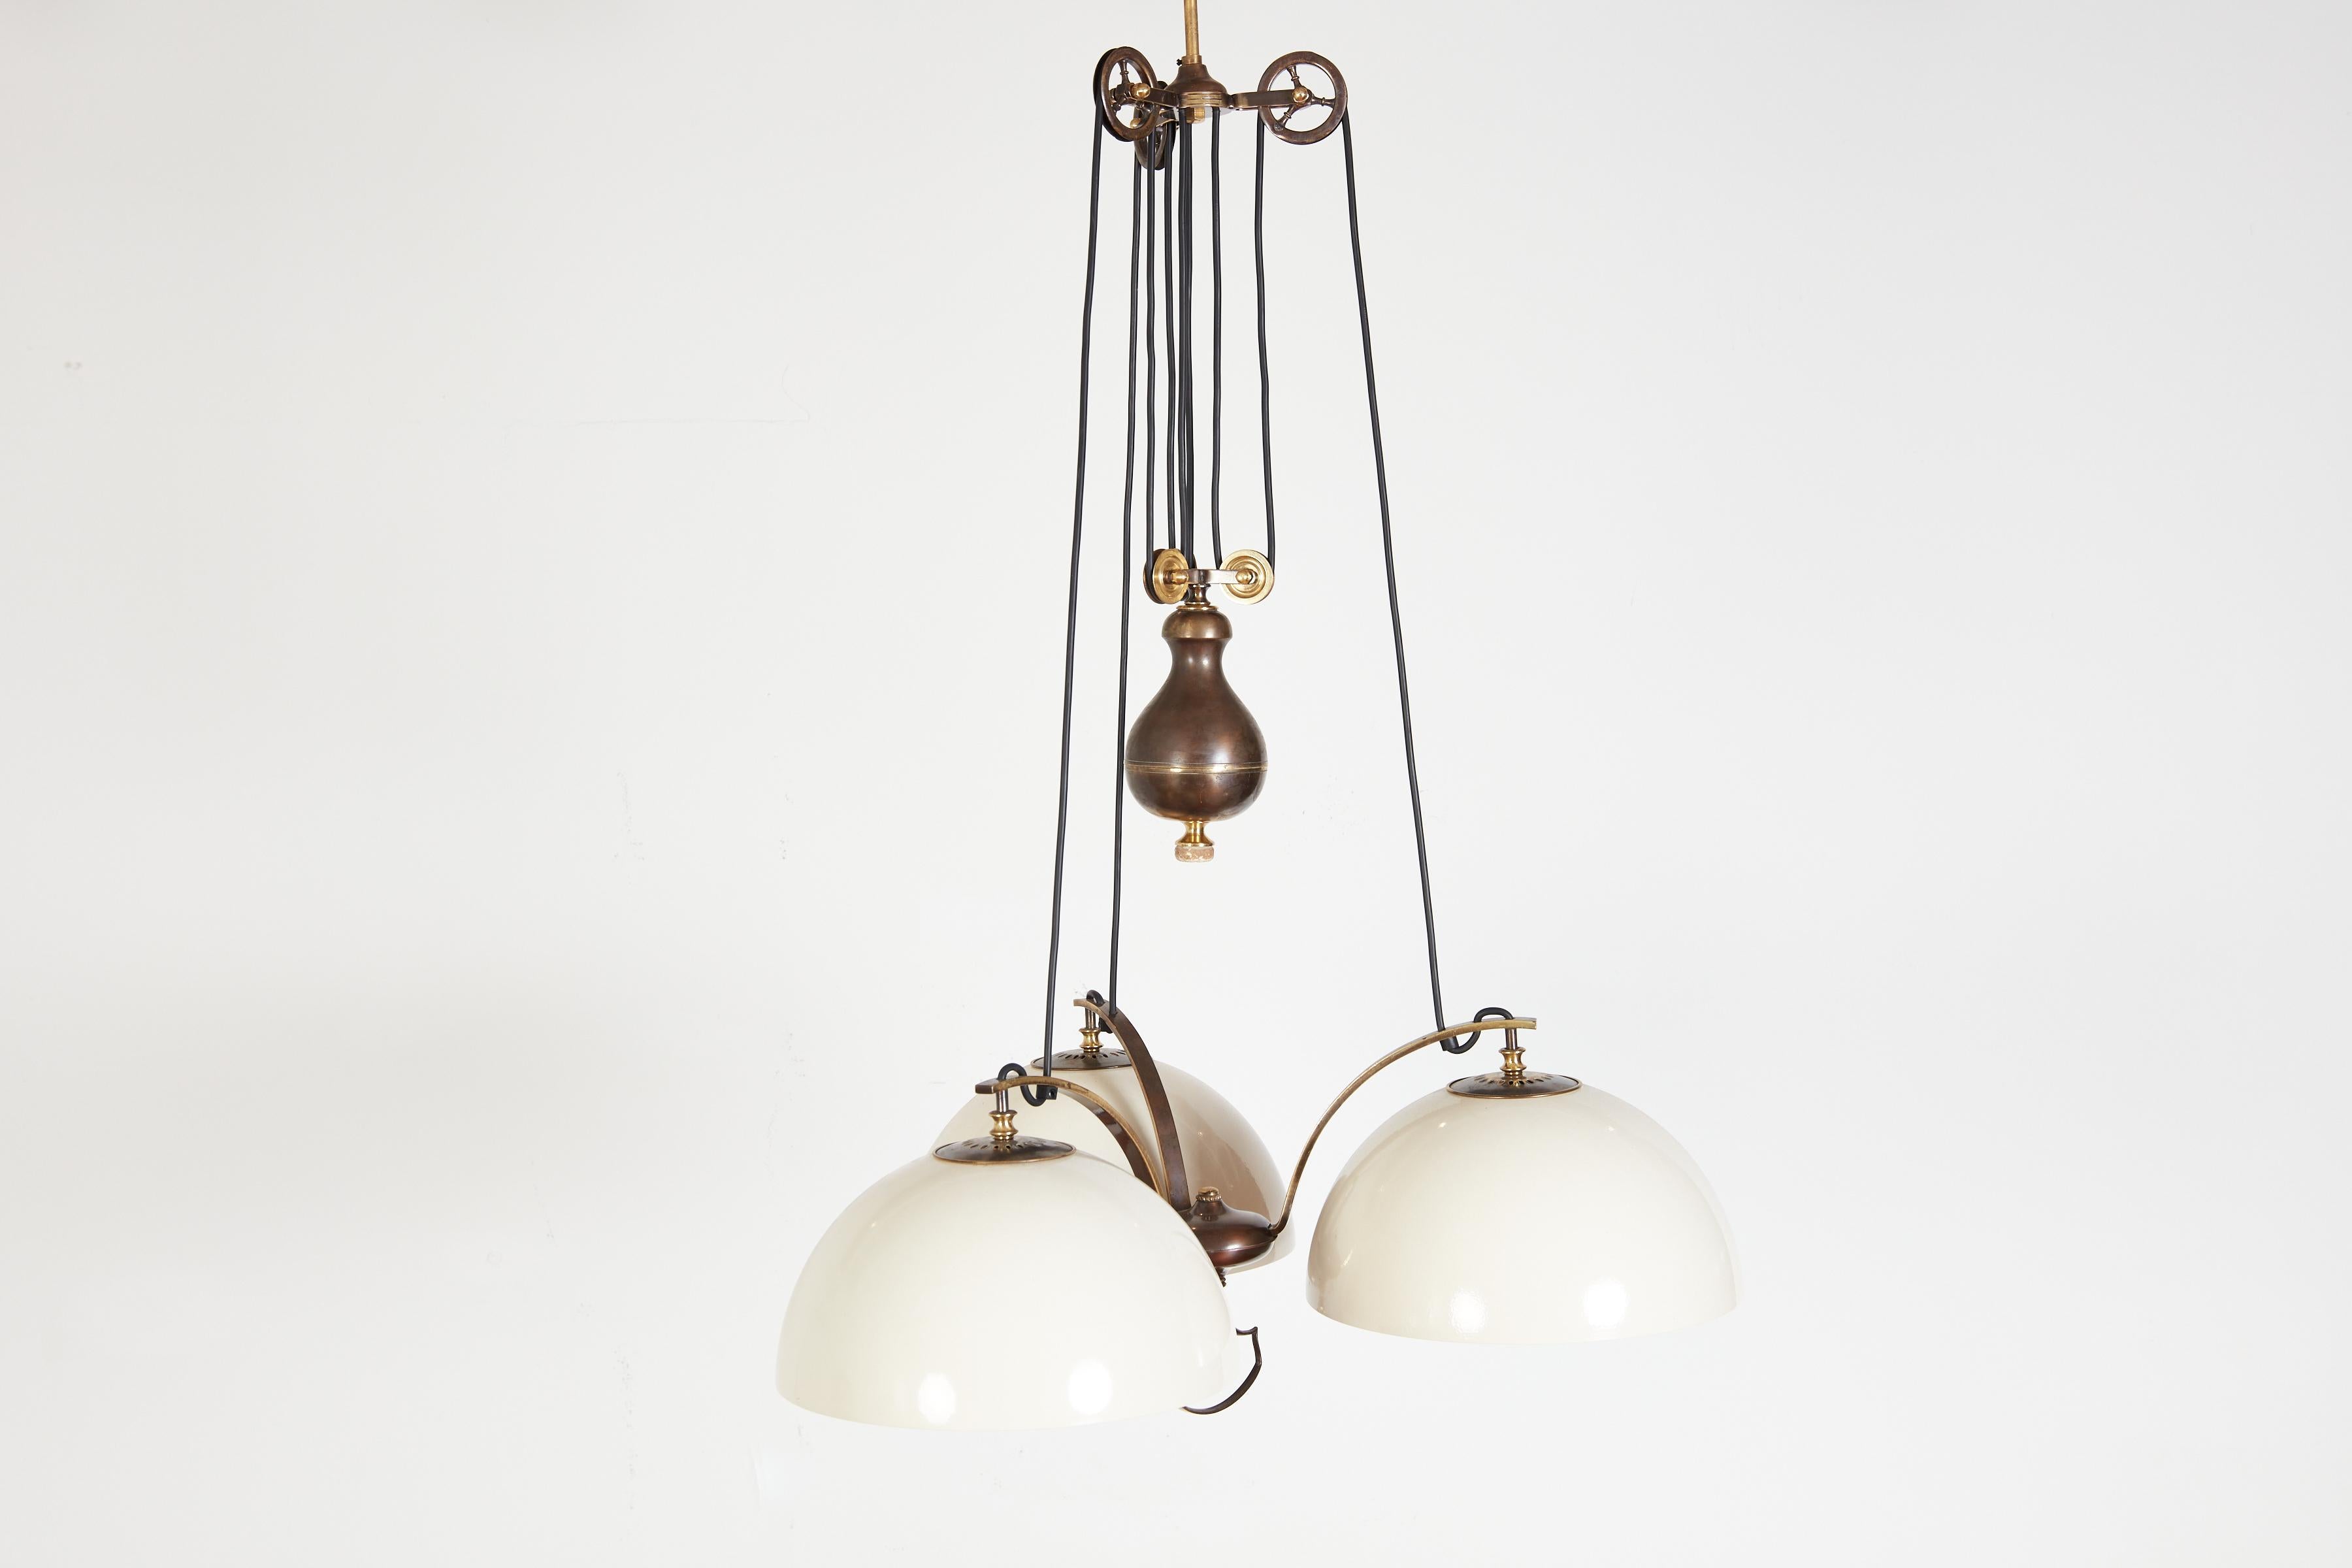 Wonderful counterbalance pendant with 3 creamy white dome shades and solid brass counterweight enabling the light to maneuver up and down.
Industrial brass wheel hardware with ornate curved brackets. 
Unique piece 
Italy, circa 1930s